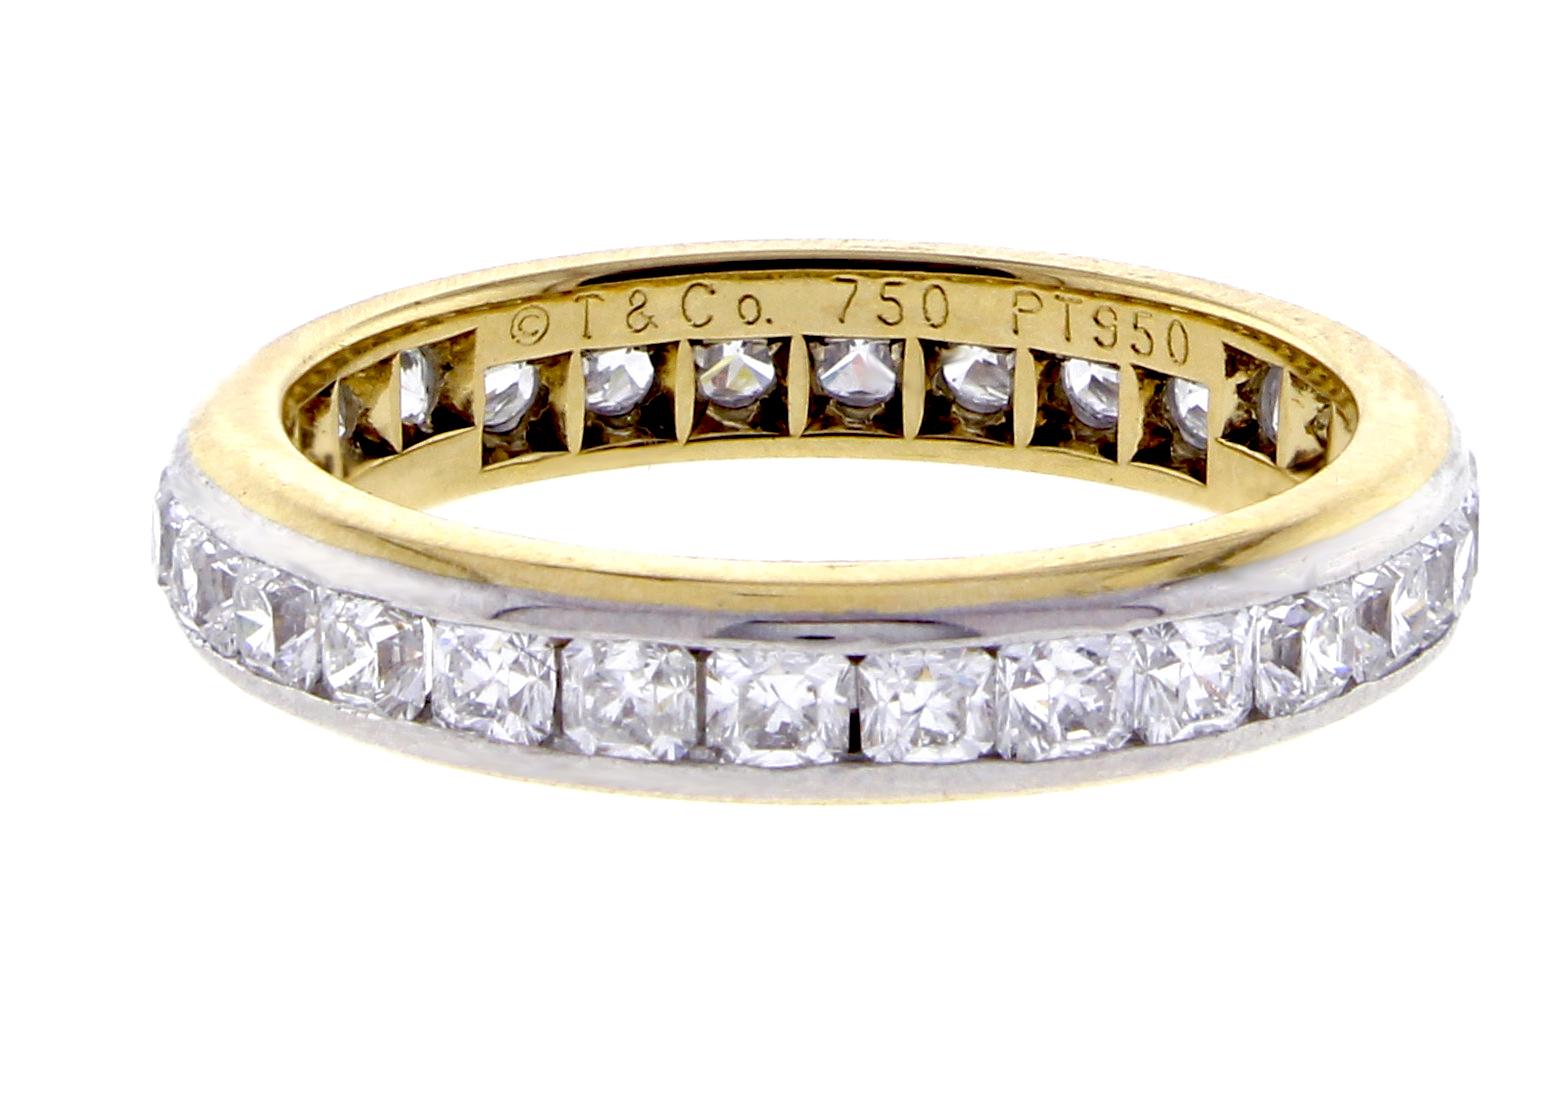 From Tiffany & Co Lucida collection, a diamonds band ring . The ring contains 27  Tiffany Lucida cut diamonds weighing approximately 2.16 carats. The diamonds are  set in a platinum channel in an 18 karat yellow fold band. F-G color and VVS clarity.